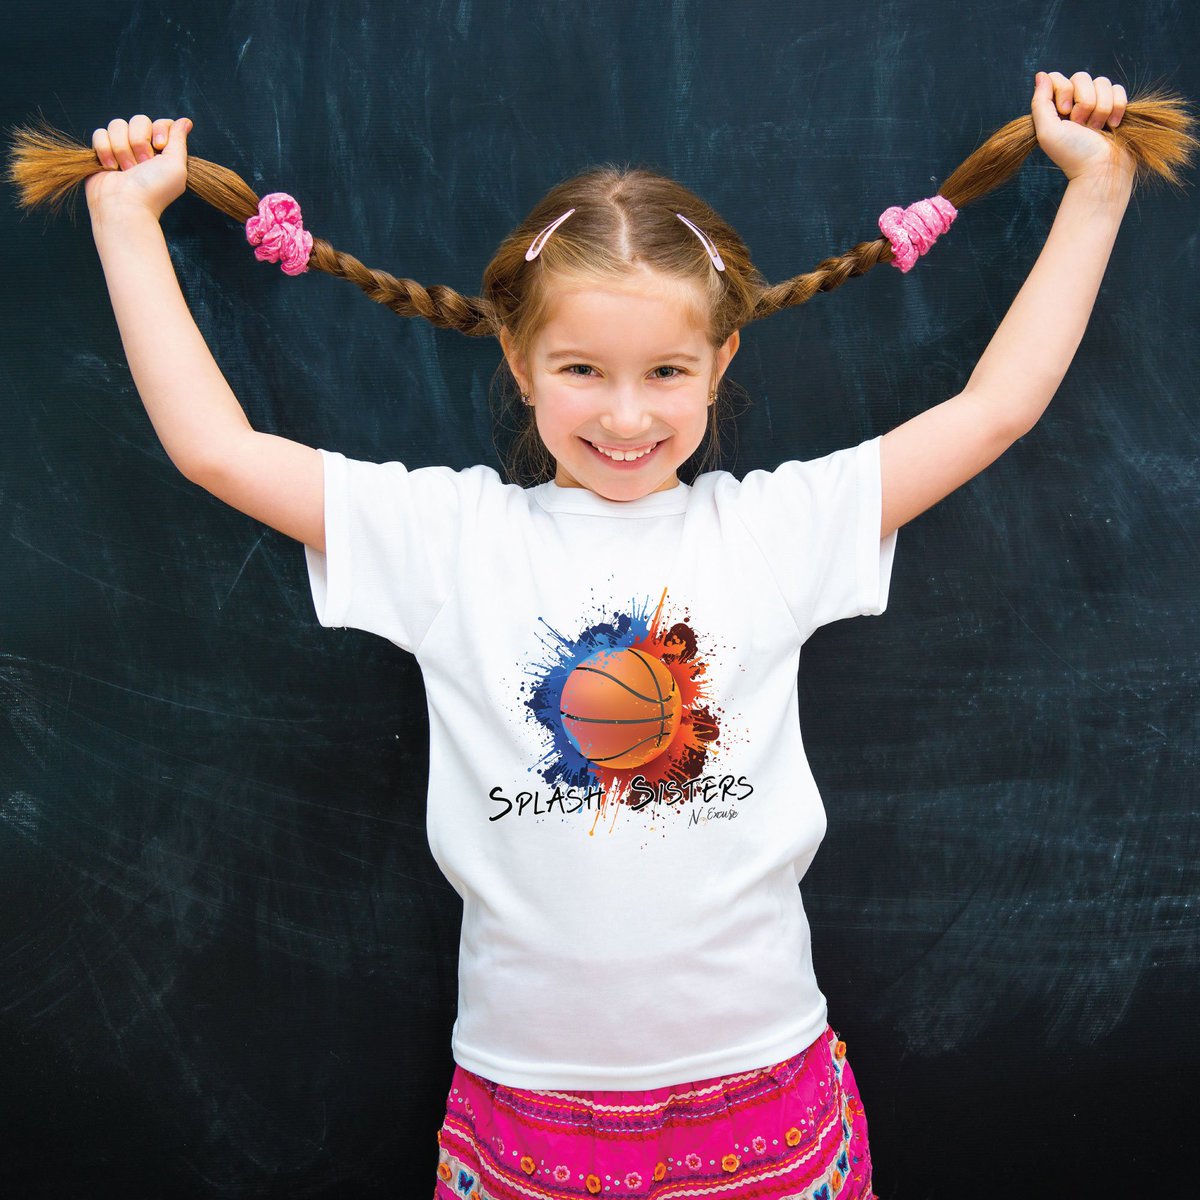 Excited to share the latest addition to ou shop: Splash Sisters Youth Girls  Basketball T-Shirt etsy.me/2PLmyrm #clothing #children #girl #girlsbasketball #basketballshirt #ladybasketball #girlsinspiration #athleticgirls #youthgirlsshirts